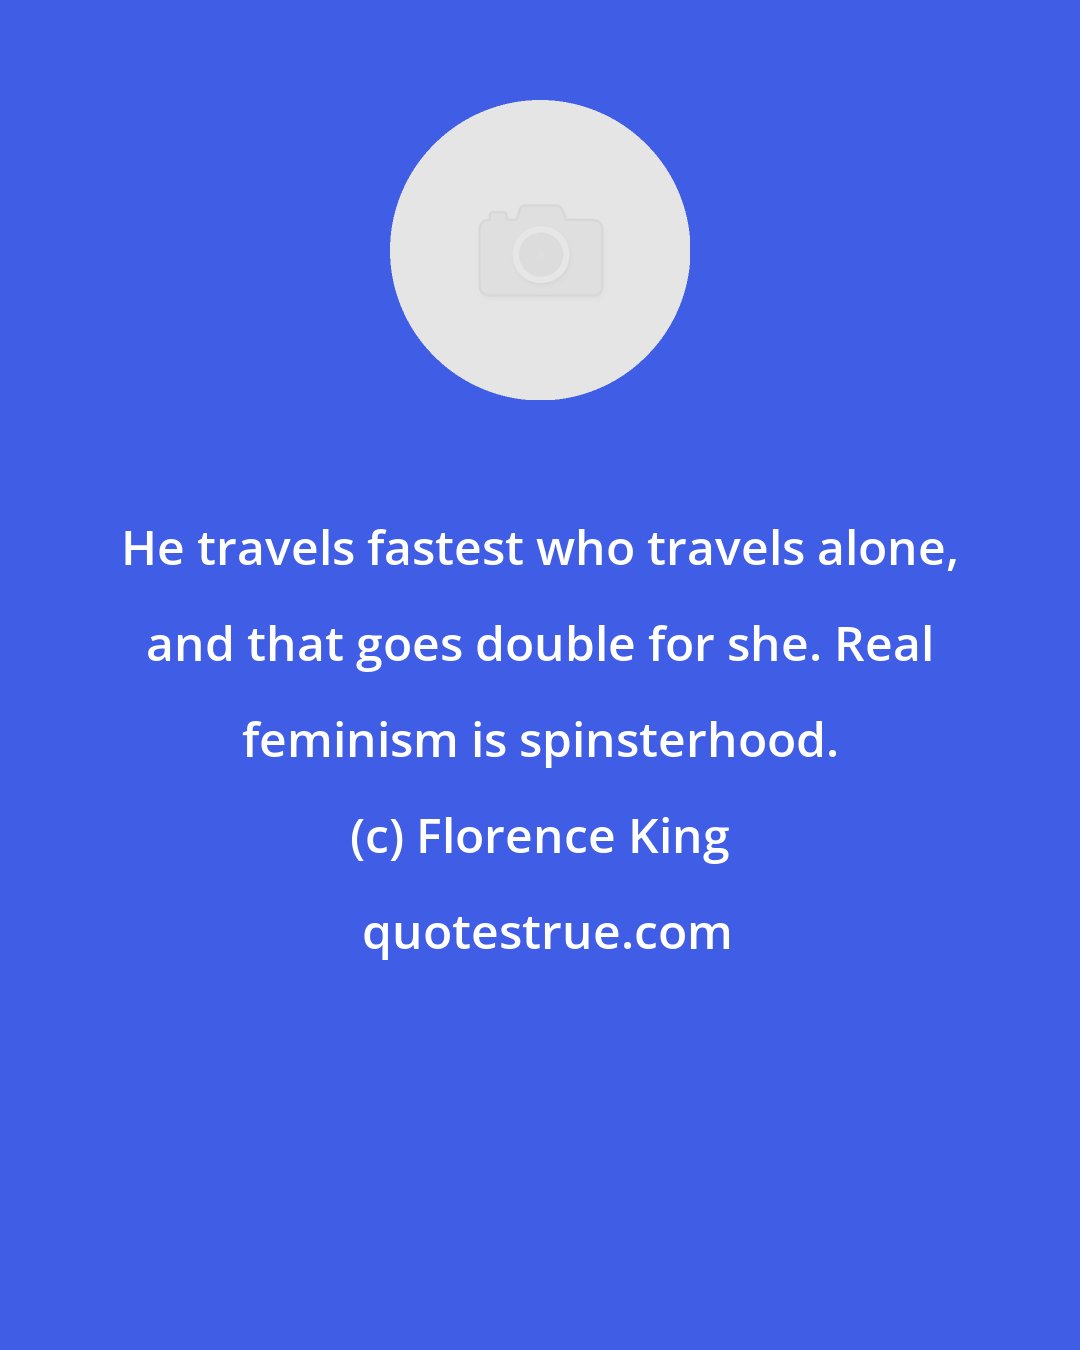 Florence King: He travels fastest who travels alone, and that goes double for she. Real feminism is spinsterhood.